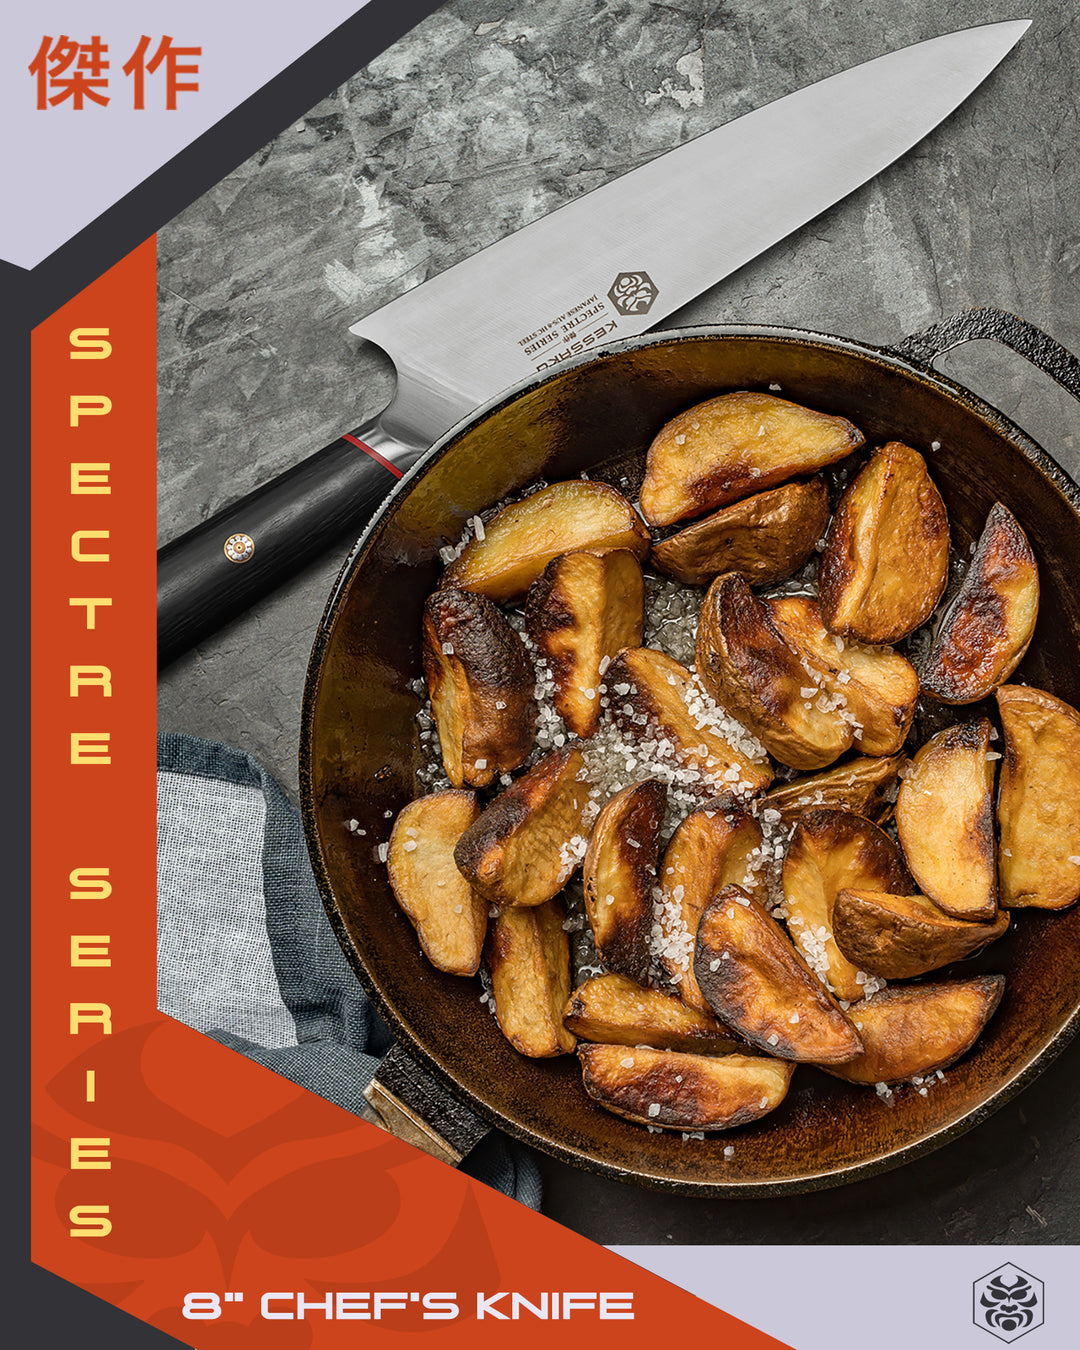 The Spectre Chef's Knife next to a skillet full of sliced potato wedges.